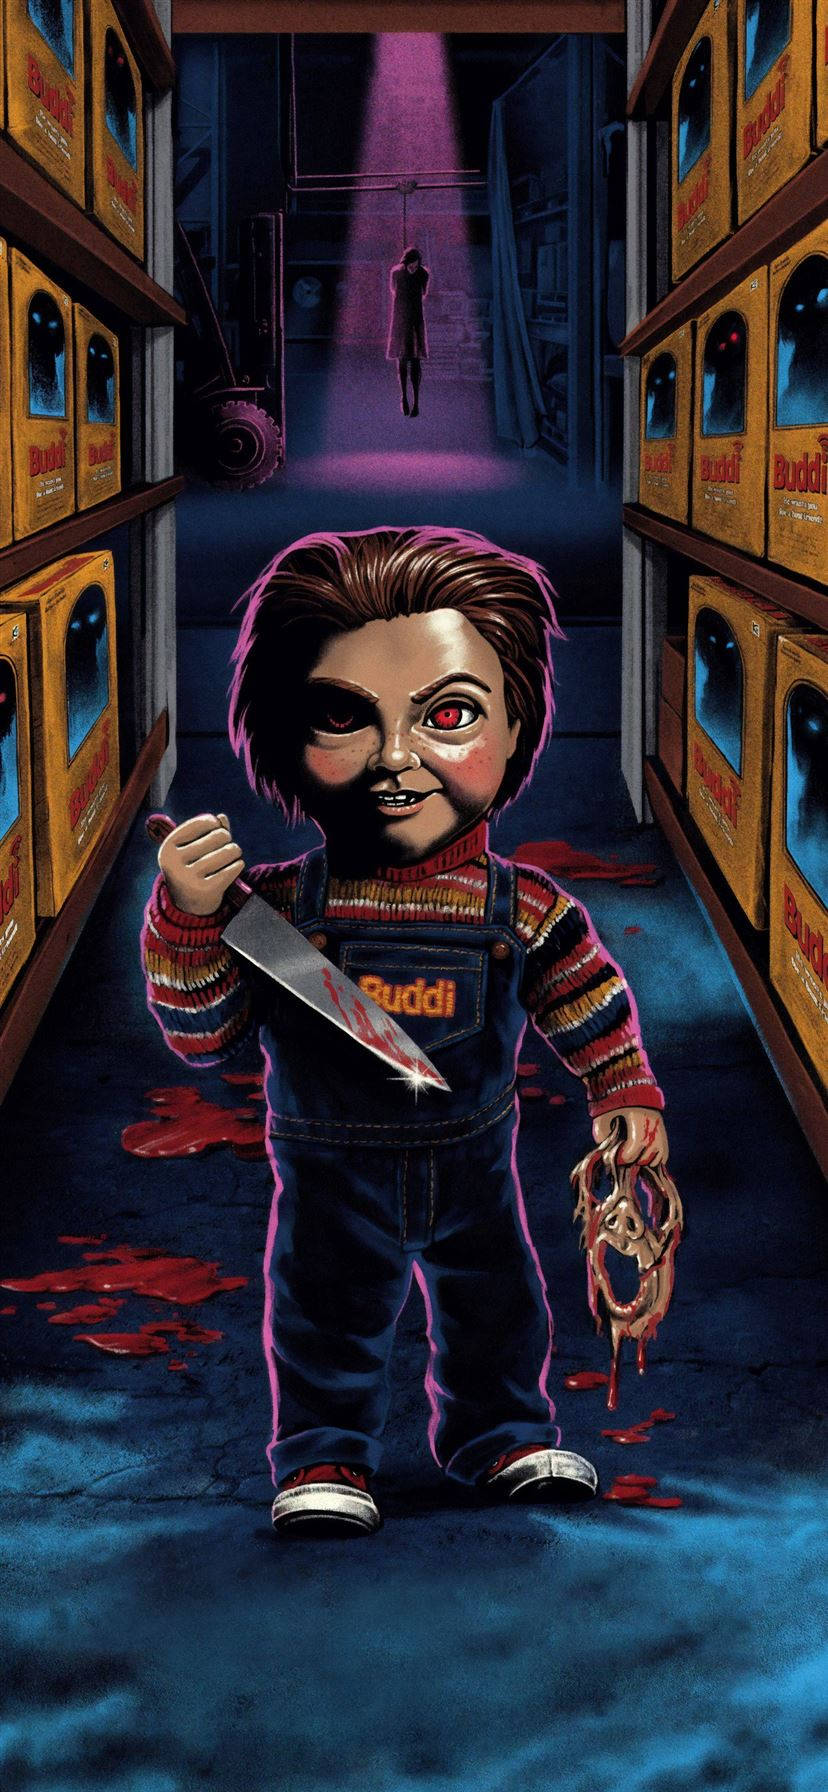 Chucky Child's Play 2019 Poster Background